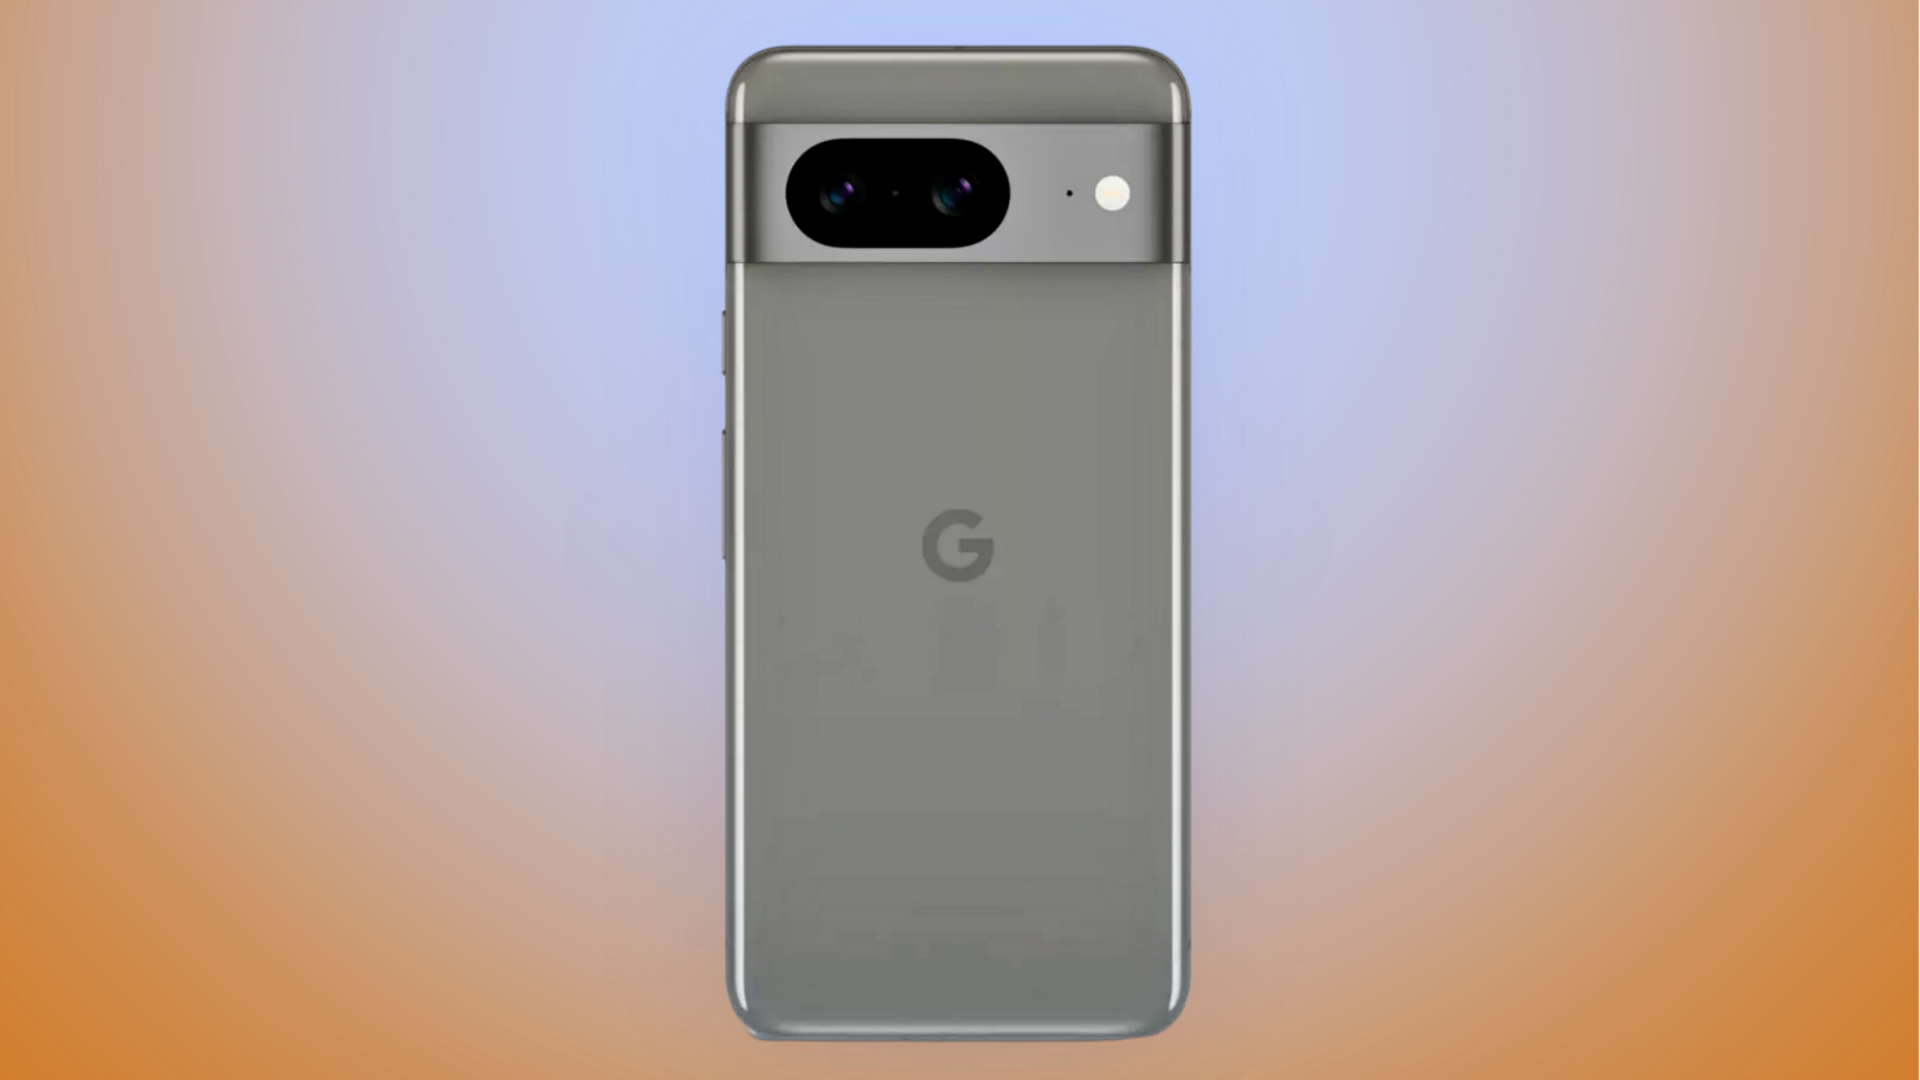 Forget Pixel 8, here's what Pixel 9 might offer